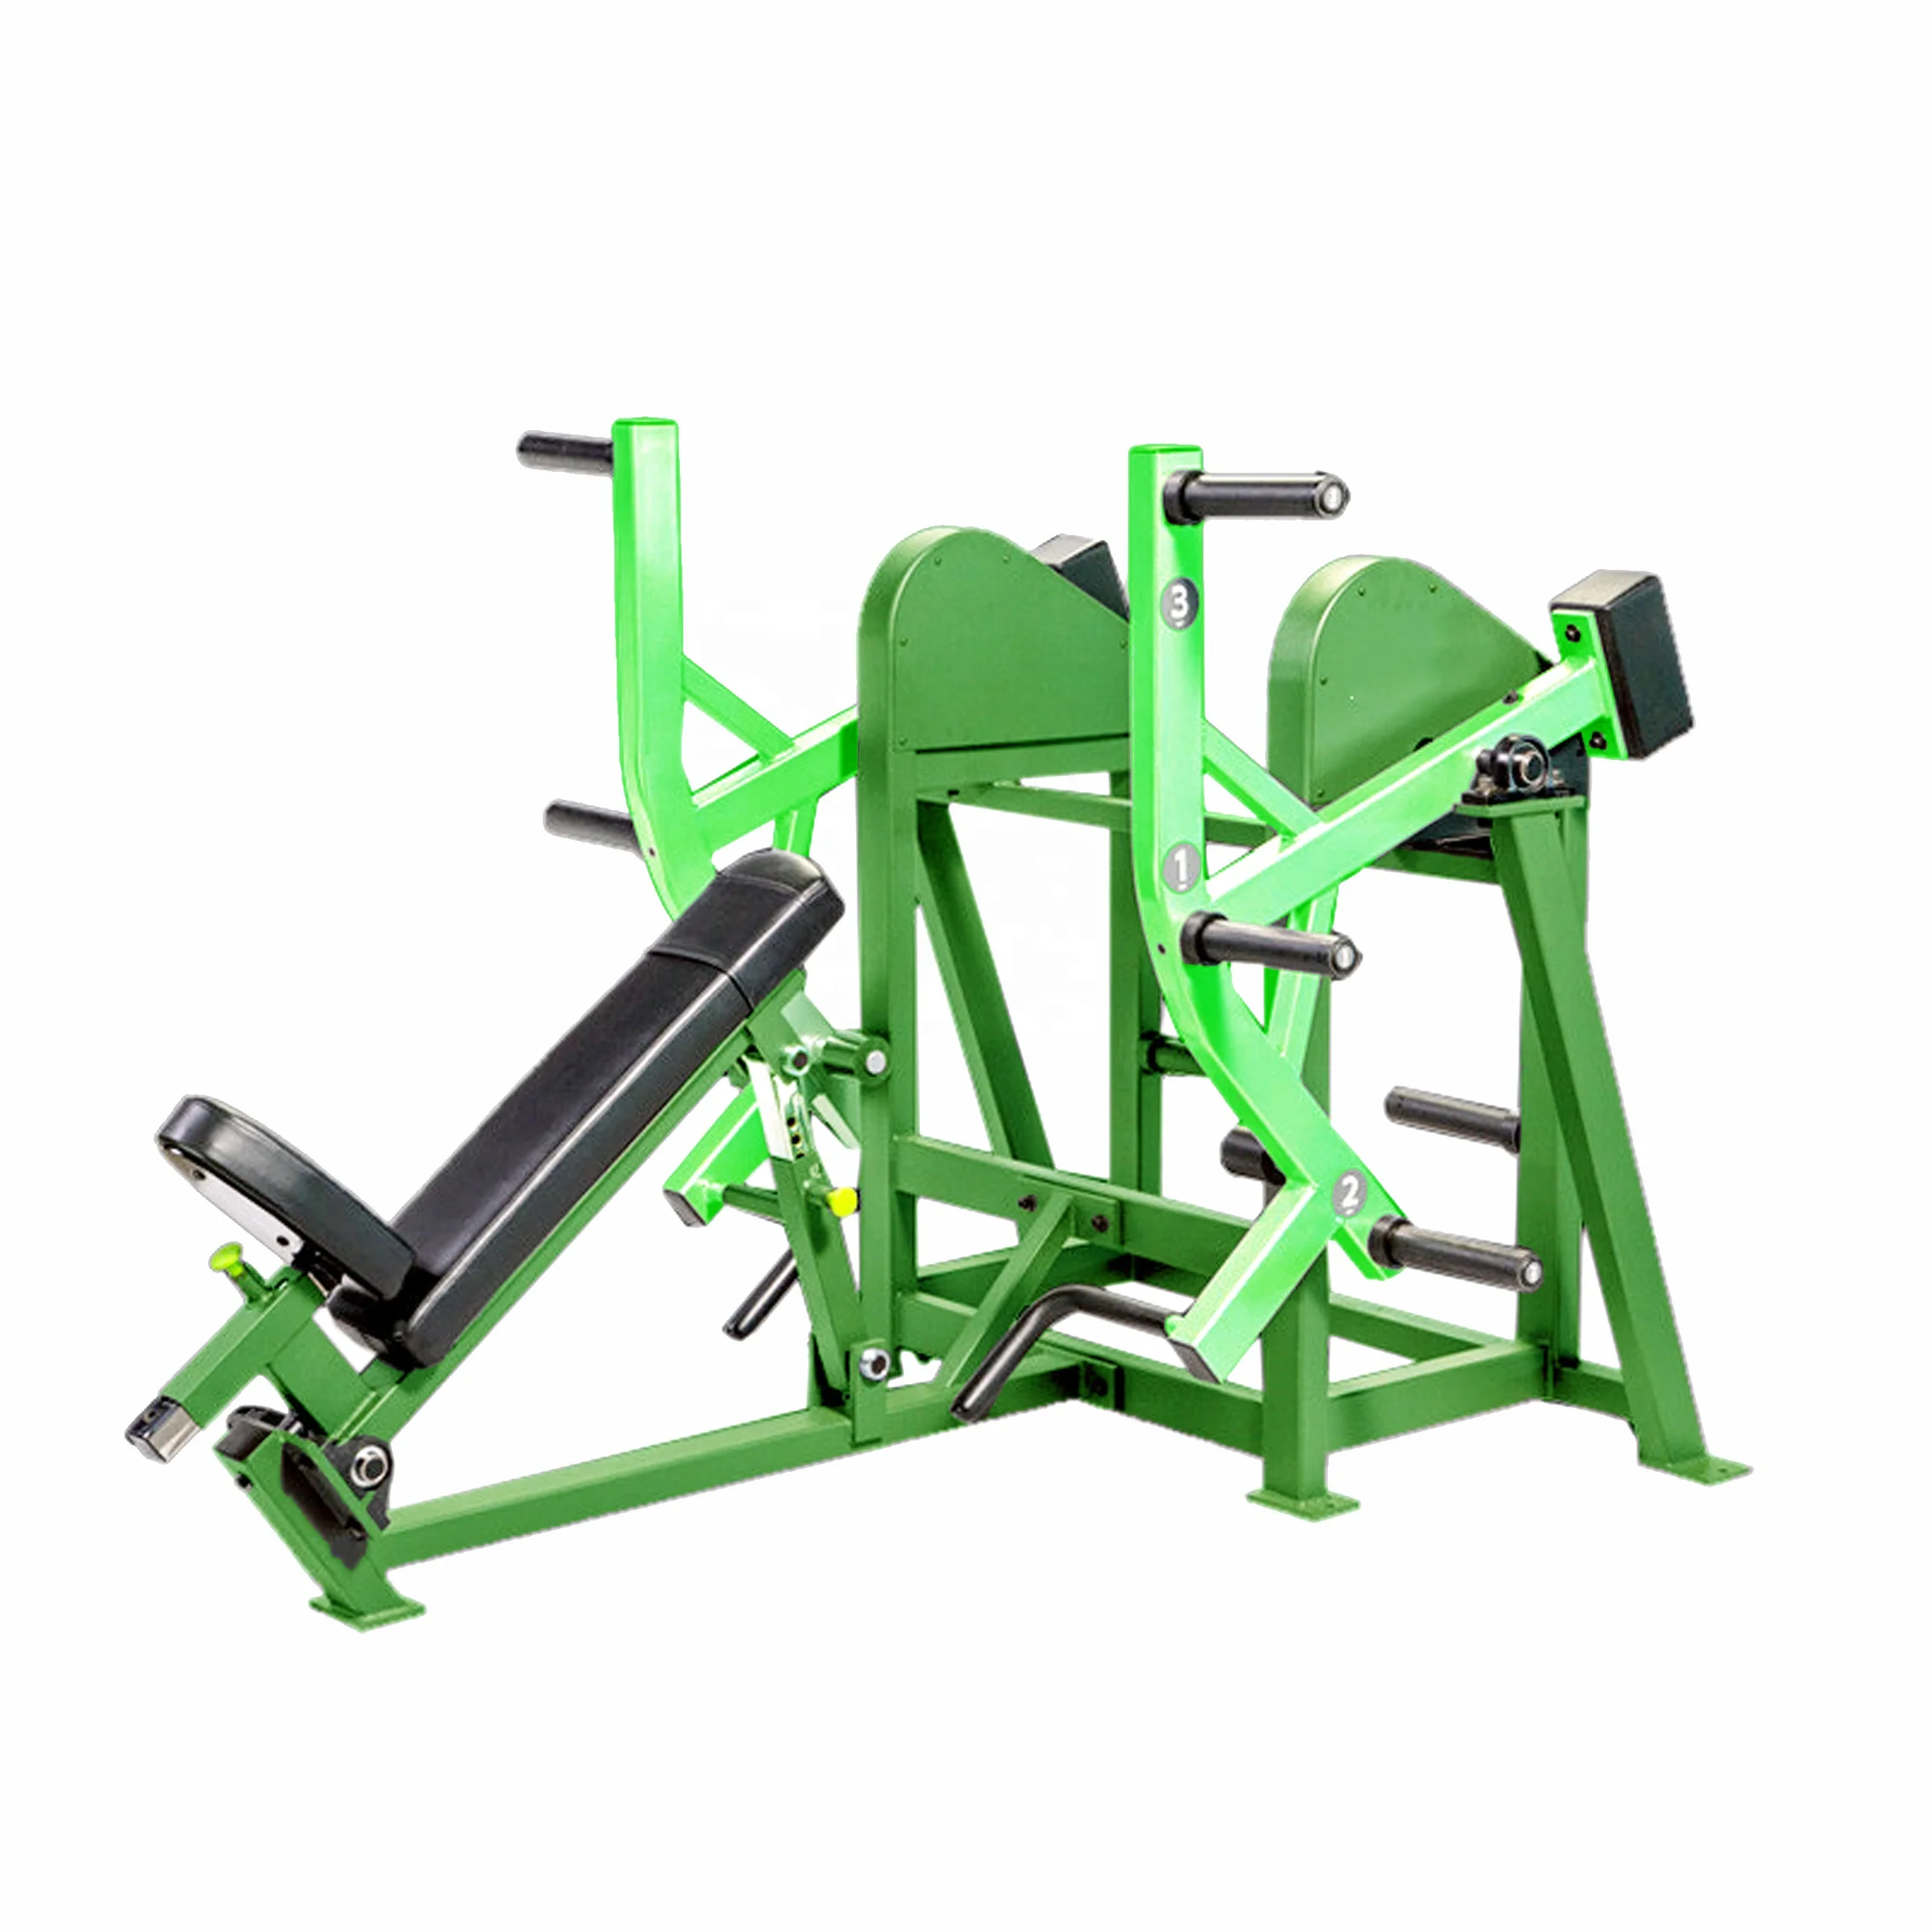 new product strength gym equipment extreme